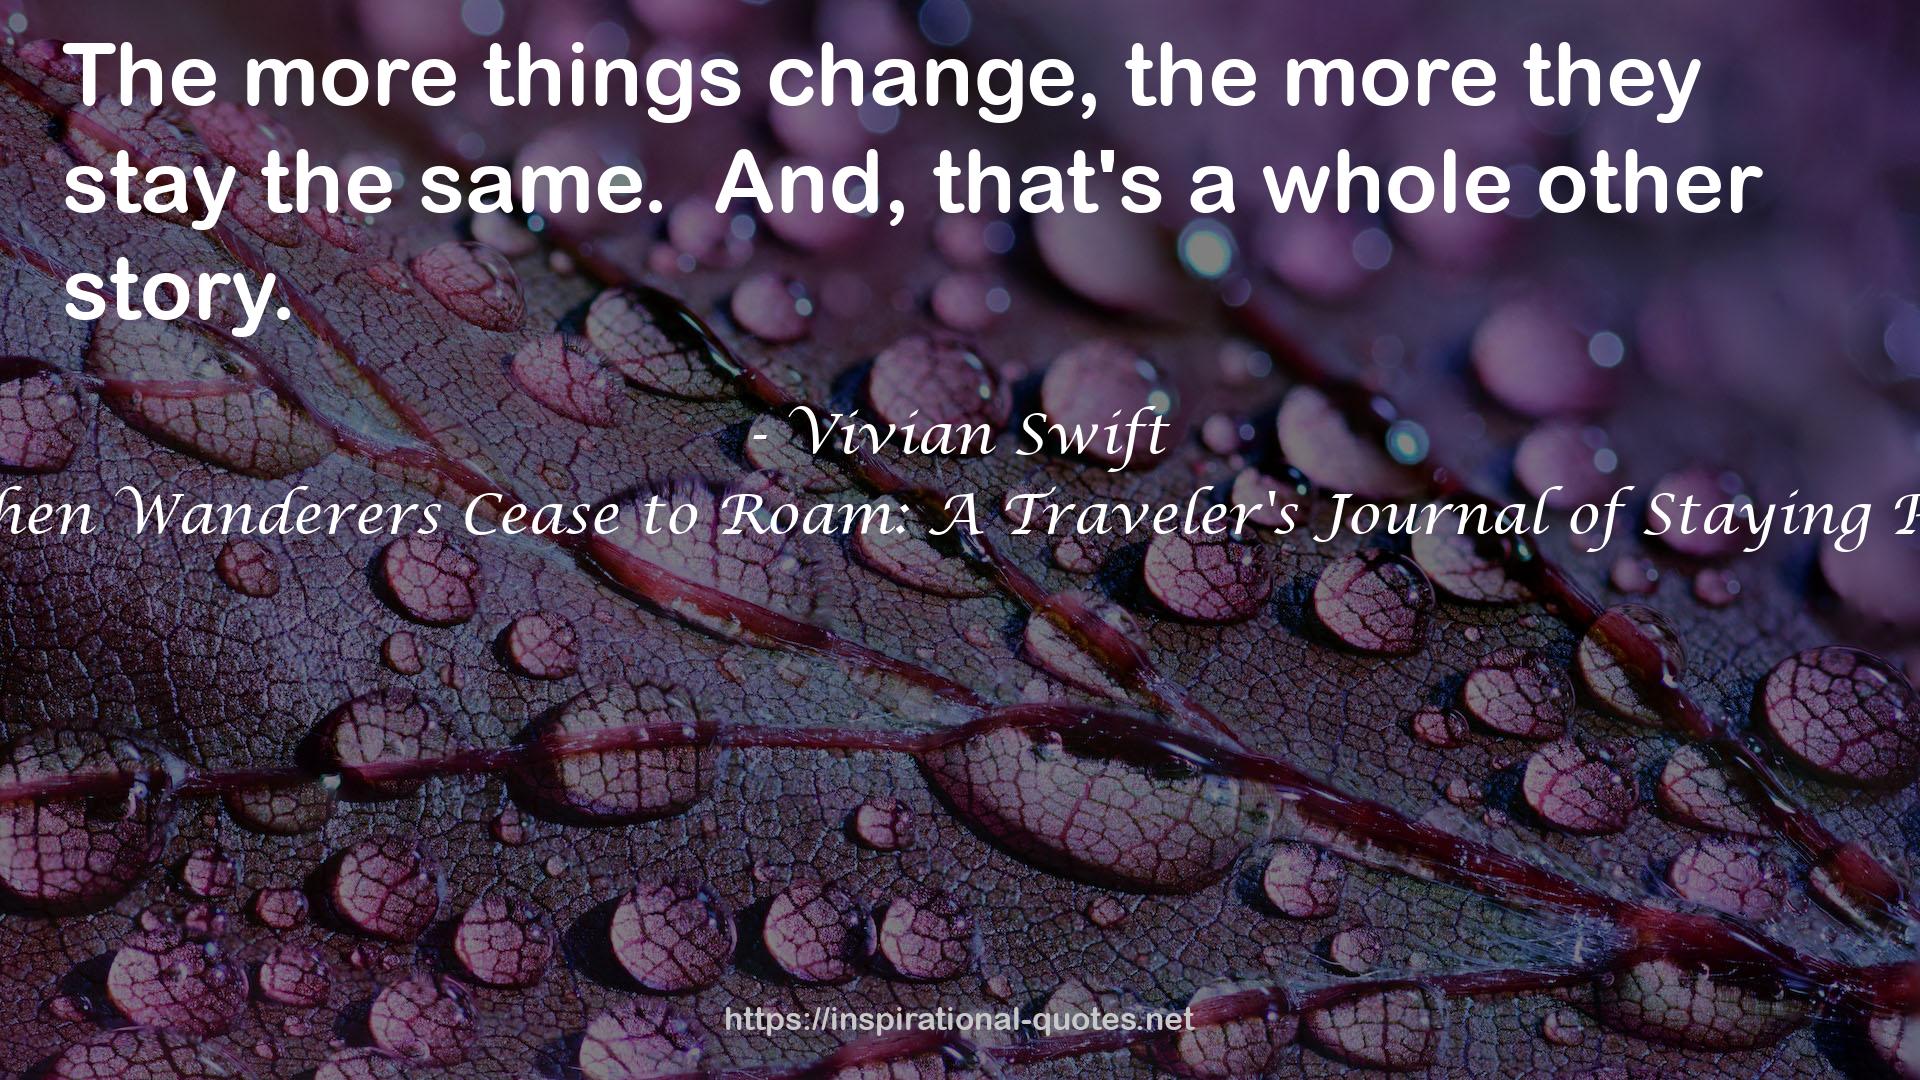 When Wanderers Cease to Roam: A Traveler's Journal of Staying Put QUOTES